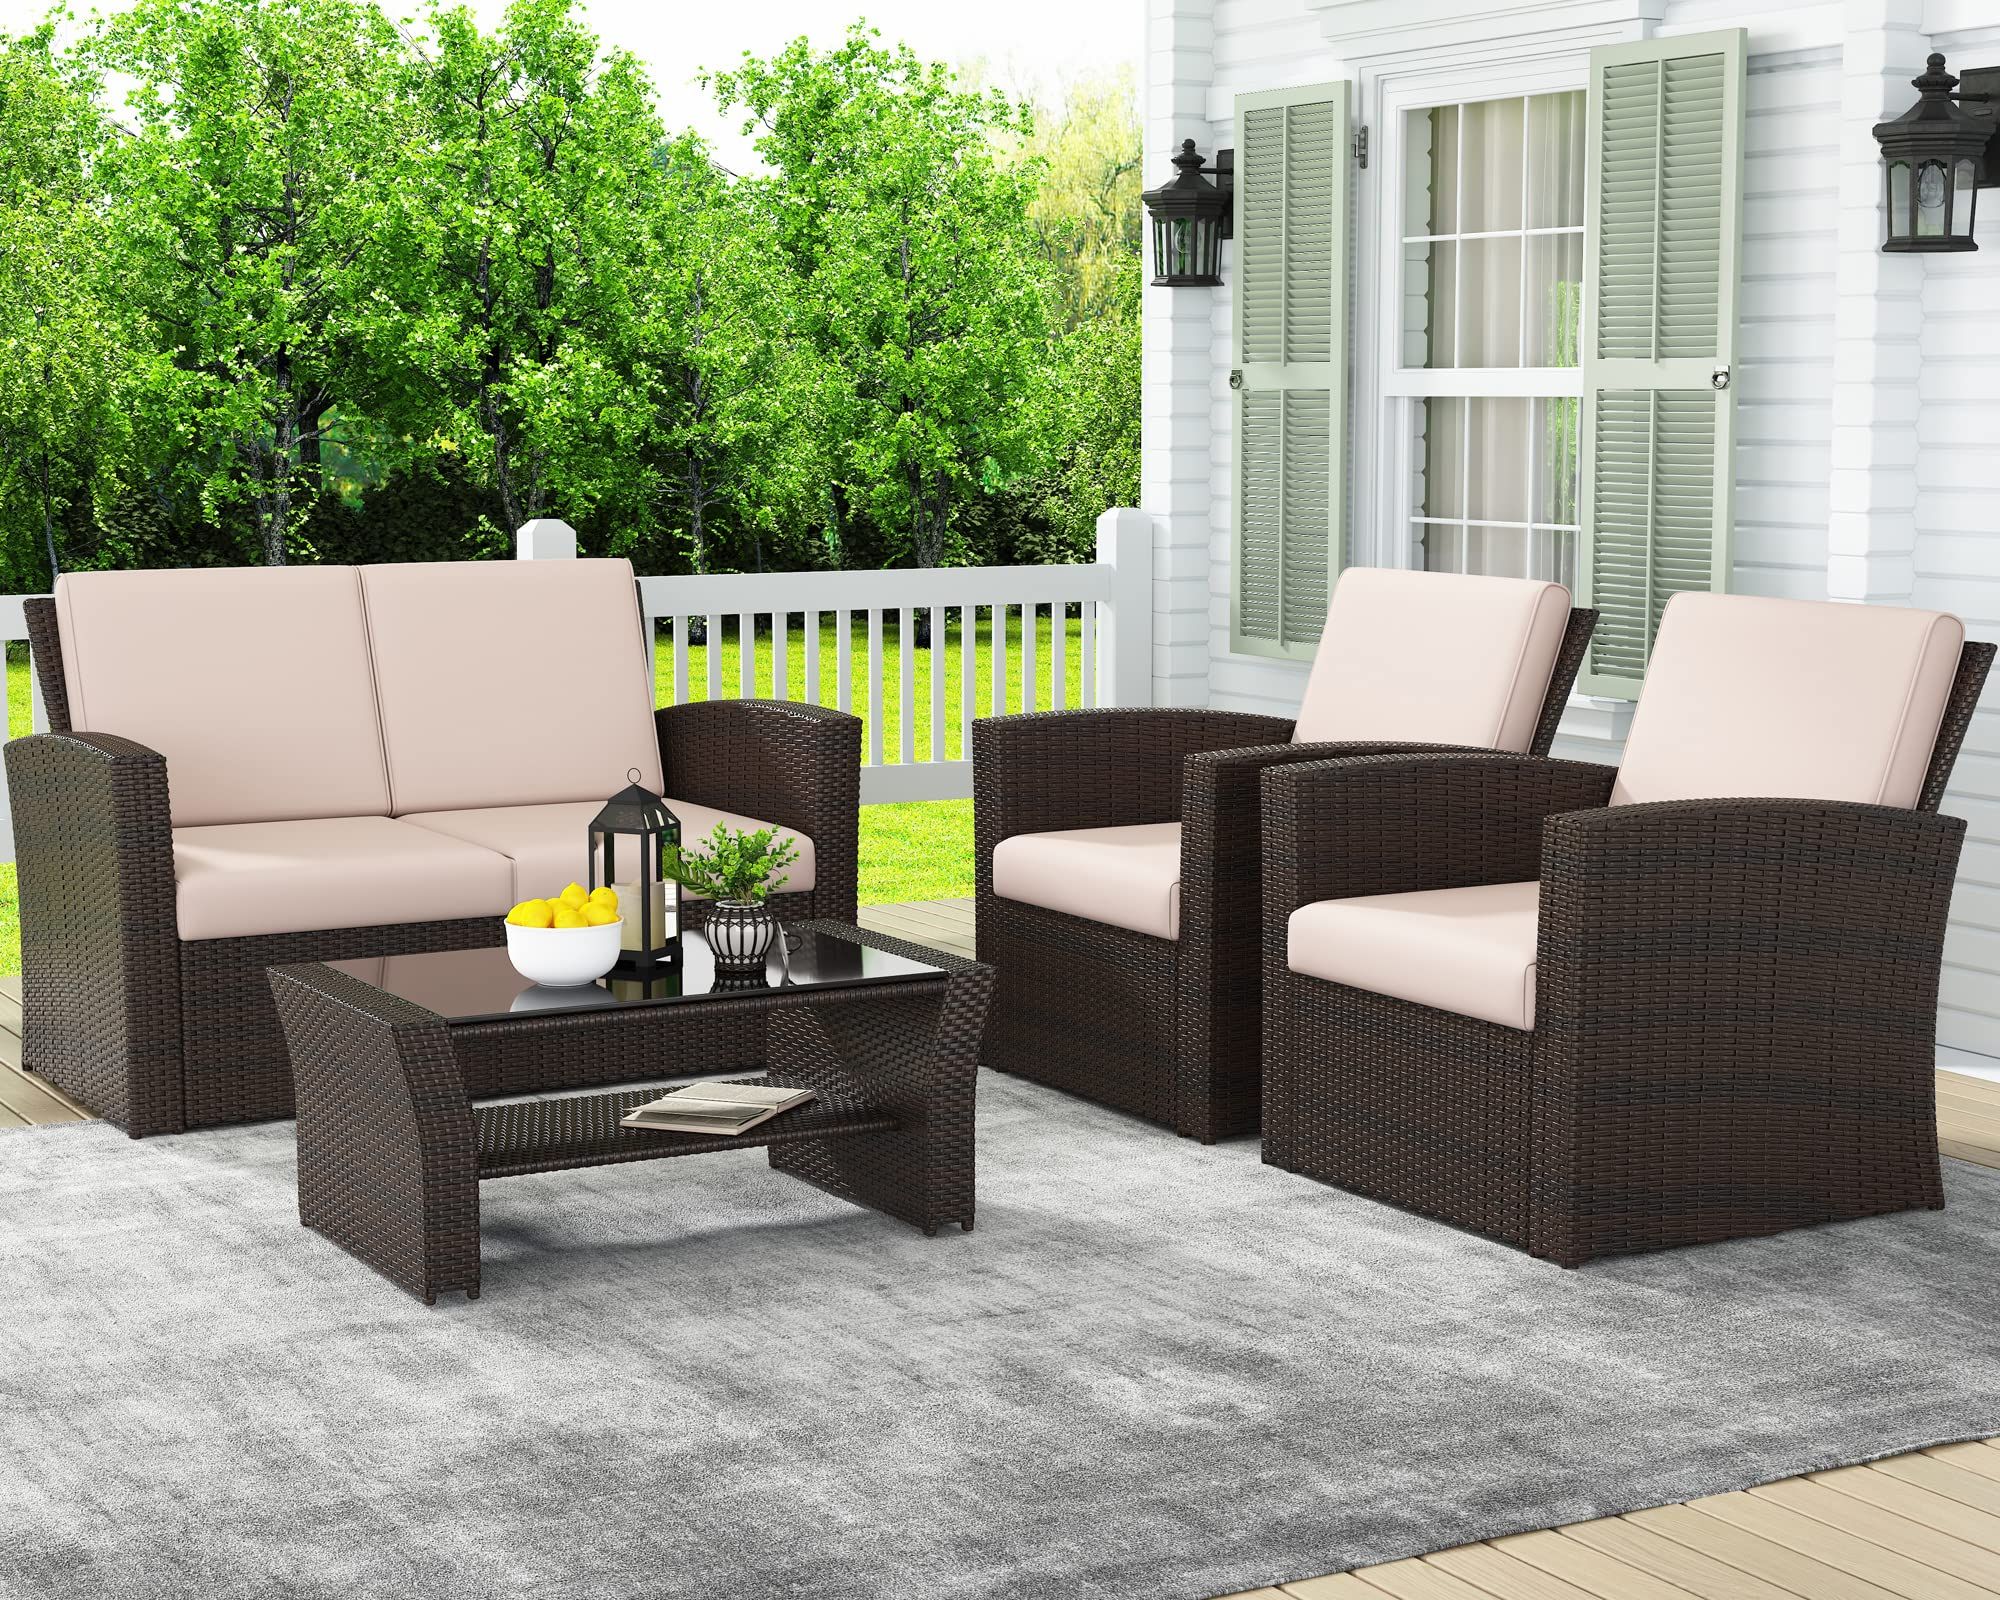 Featured Photo of Top 15 of 4 Piece Outdoor Wicker Seating Set in Brown